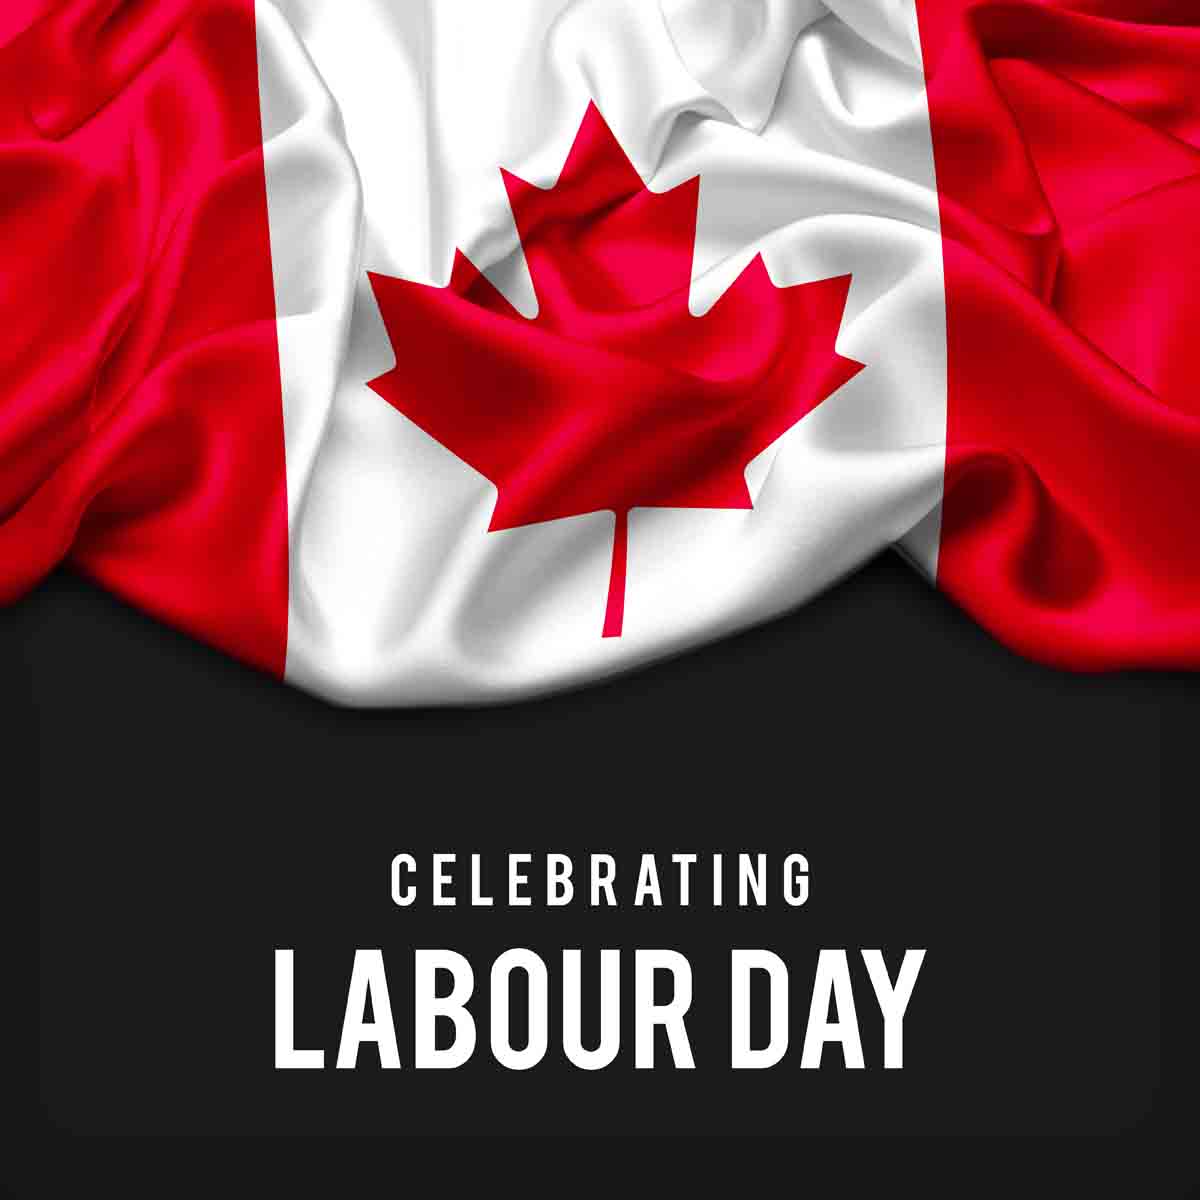 All Town facilities are closed Monday September 3 for Labour Day. Enjoy this last long weekend of the summer! https://t.co/r2ho8Nk3bm